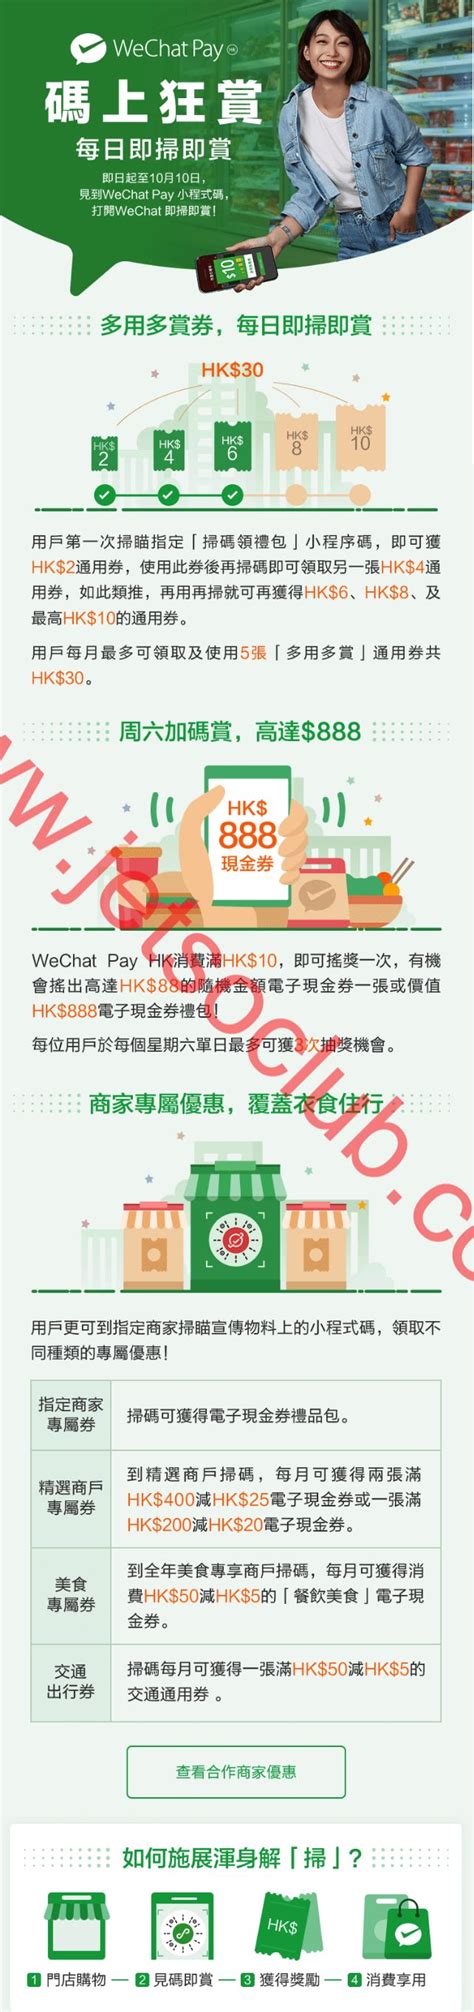 Wechat pay is a daily payment tool used by chinese consumers around the world with over 800 million monthly active users, providing a smart and efficient payment solution for both consumers and merchants. WeChat Pay：最新商戶優惠一覽（至10/10） ( Jetso Club 著數俱樂部 )